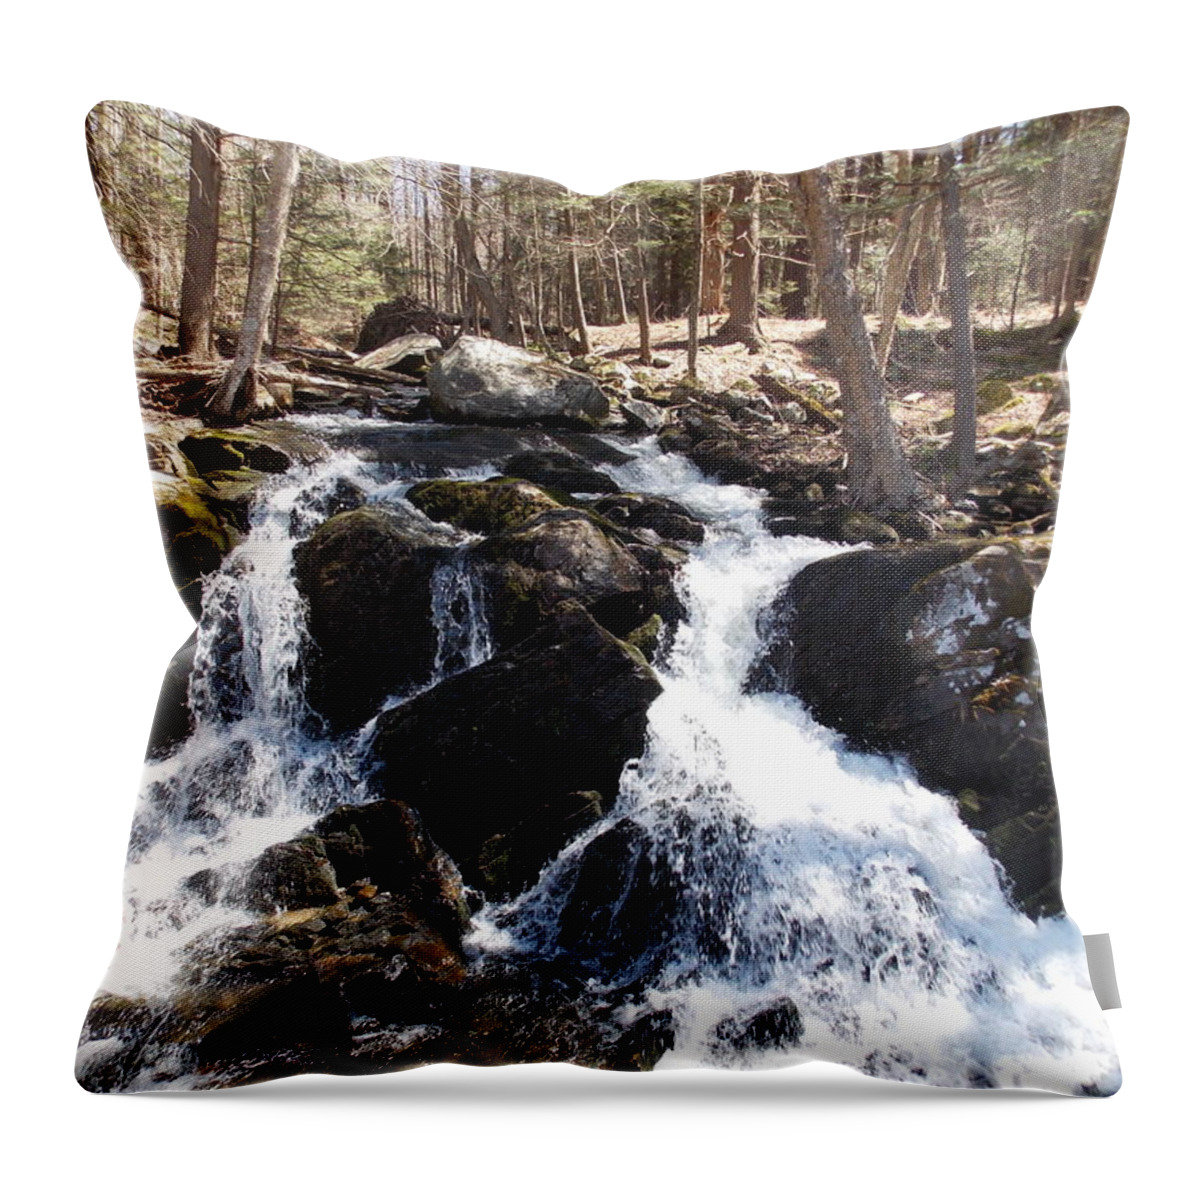 Deans Ravine Throw Pillow featuring the photograph Deans Ravine by Catherine Gagne